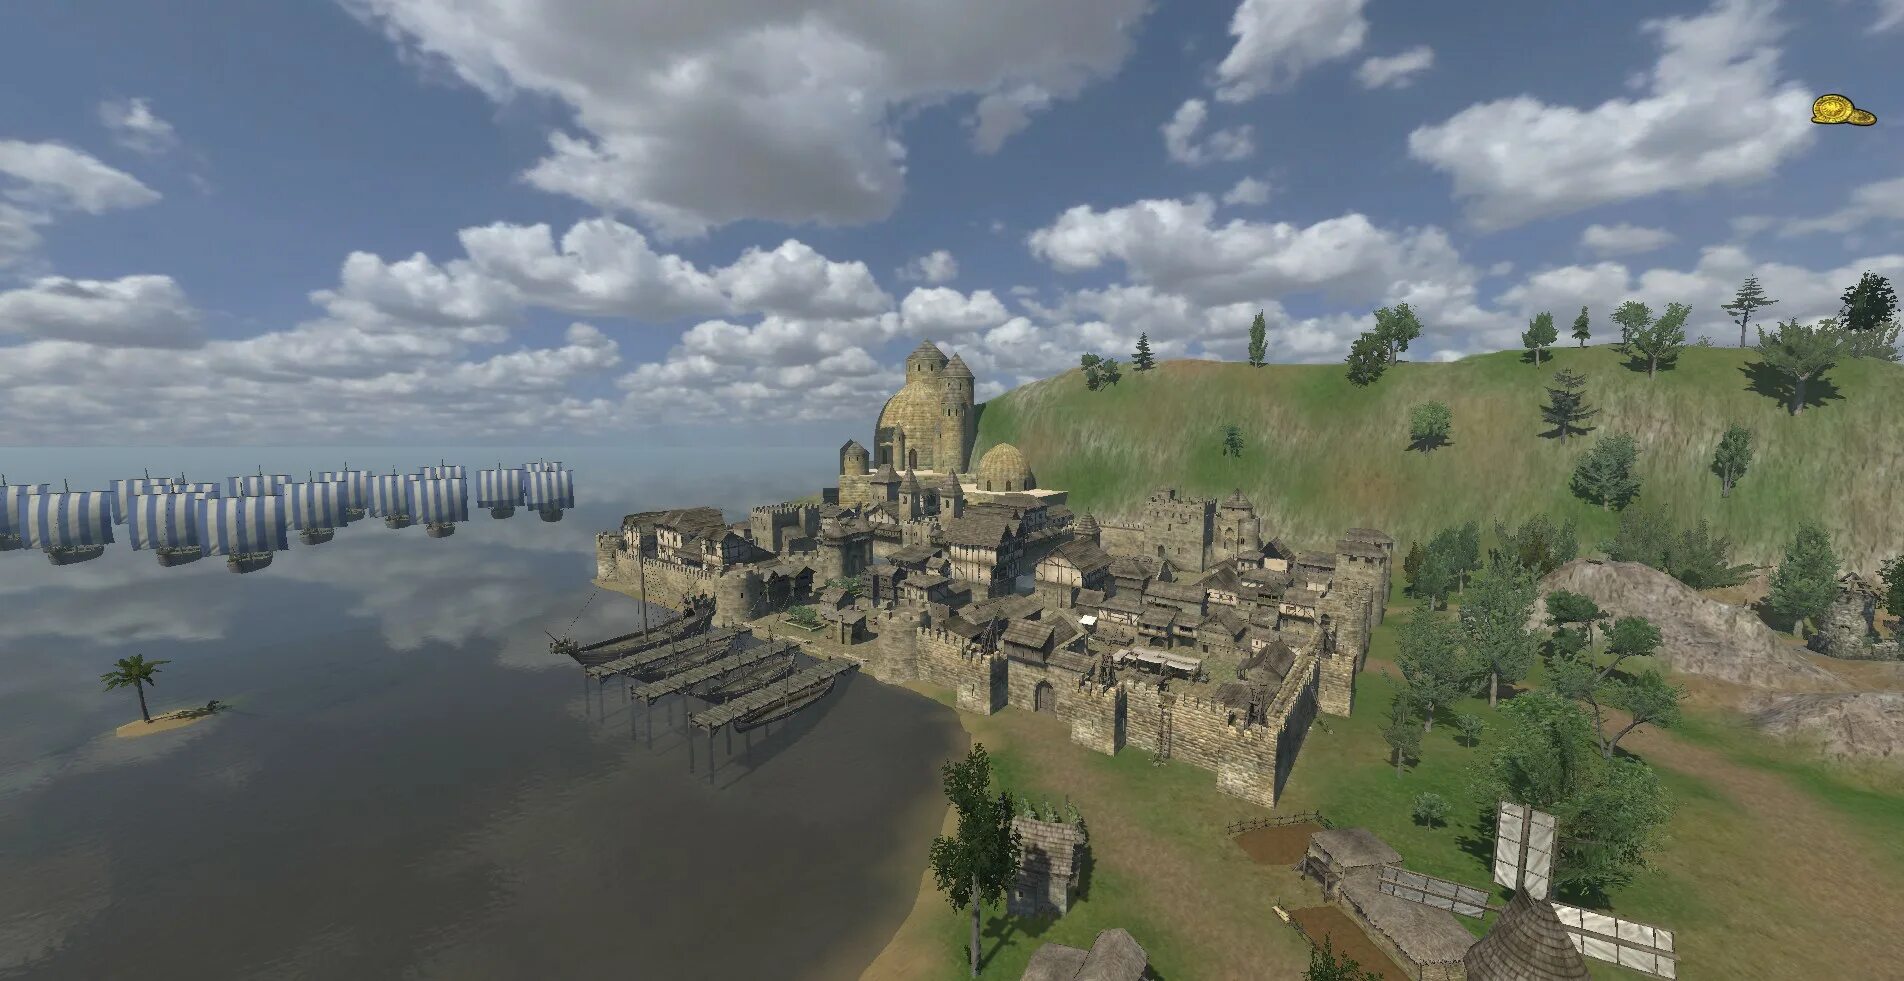 Mount & Blade "Gun-thunder1". Mount and Blade 3 город. Маунт энд блейд варбанд persistent World. Mount and Blade Warband города.